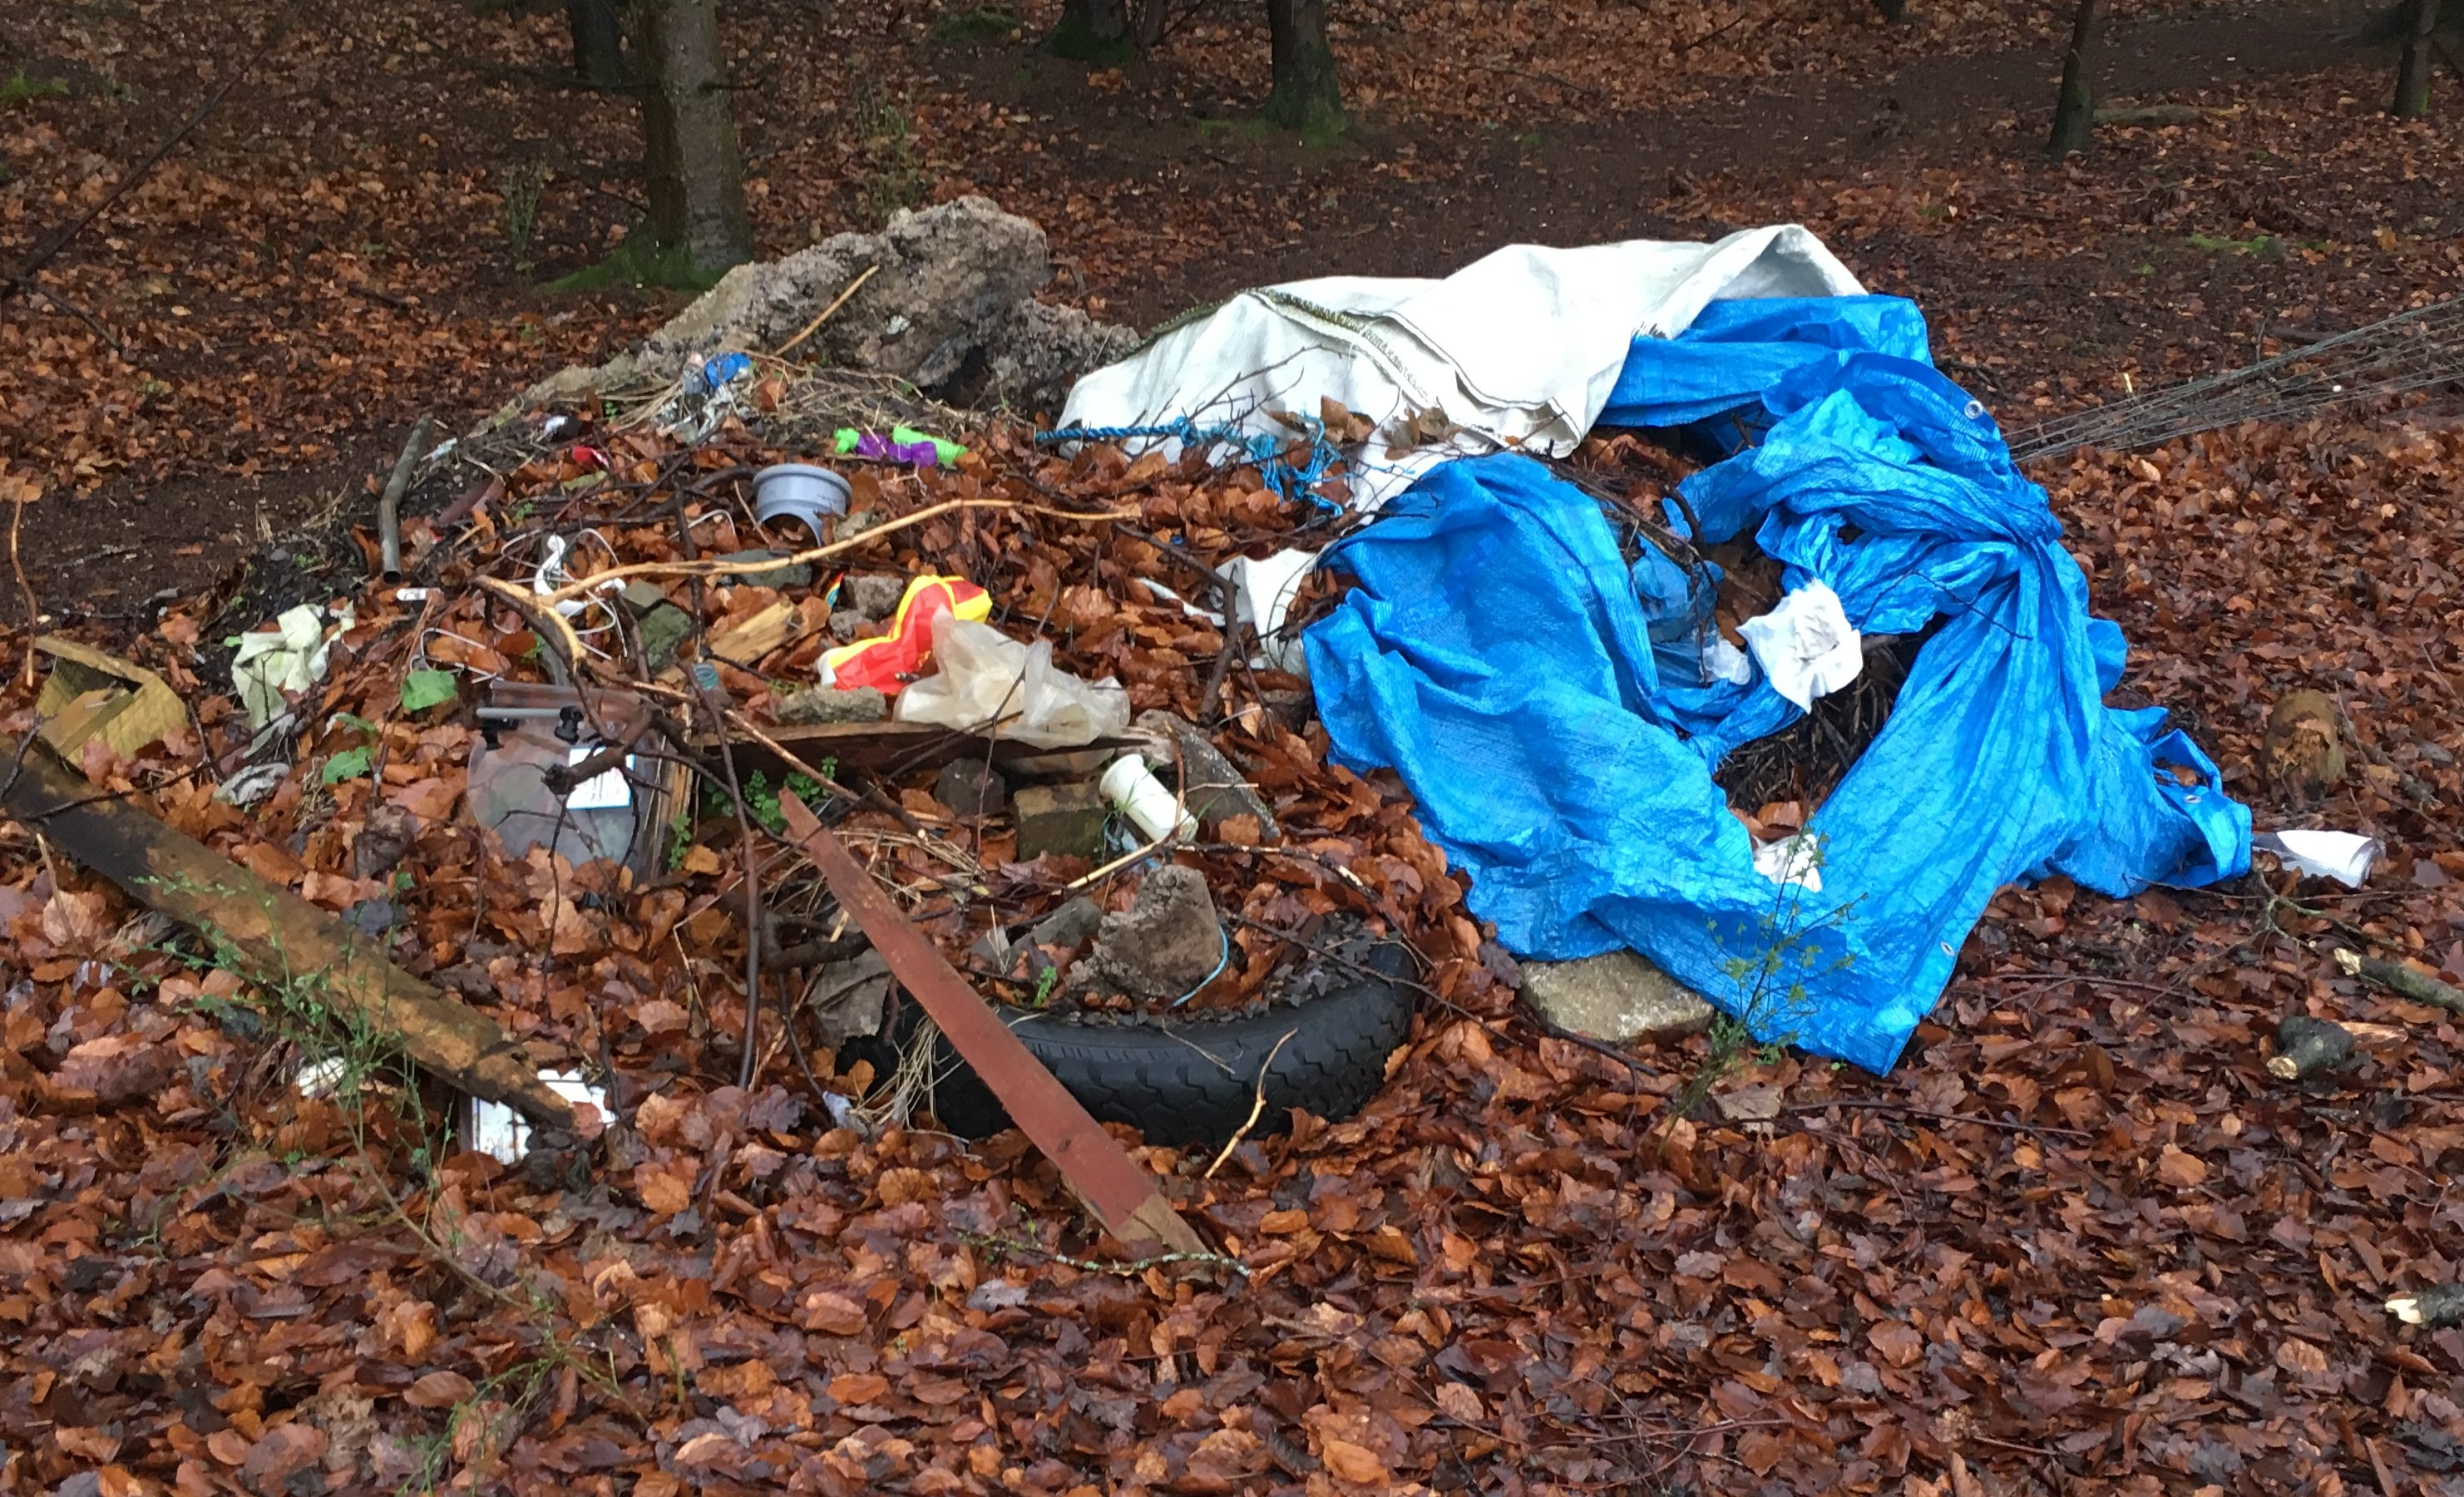 Recent flytipping in Morendy Woods